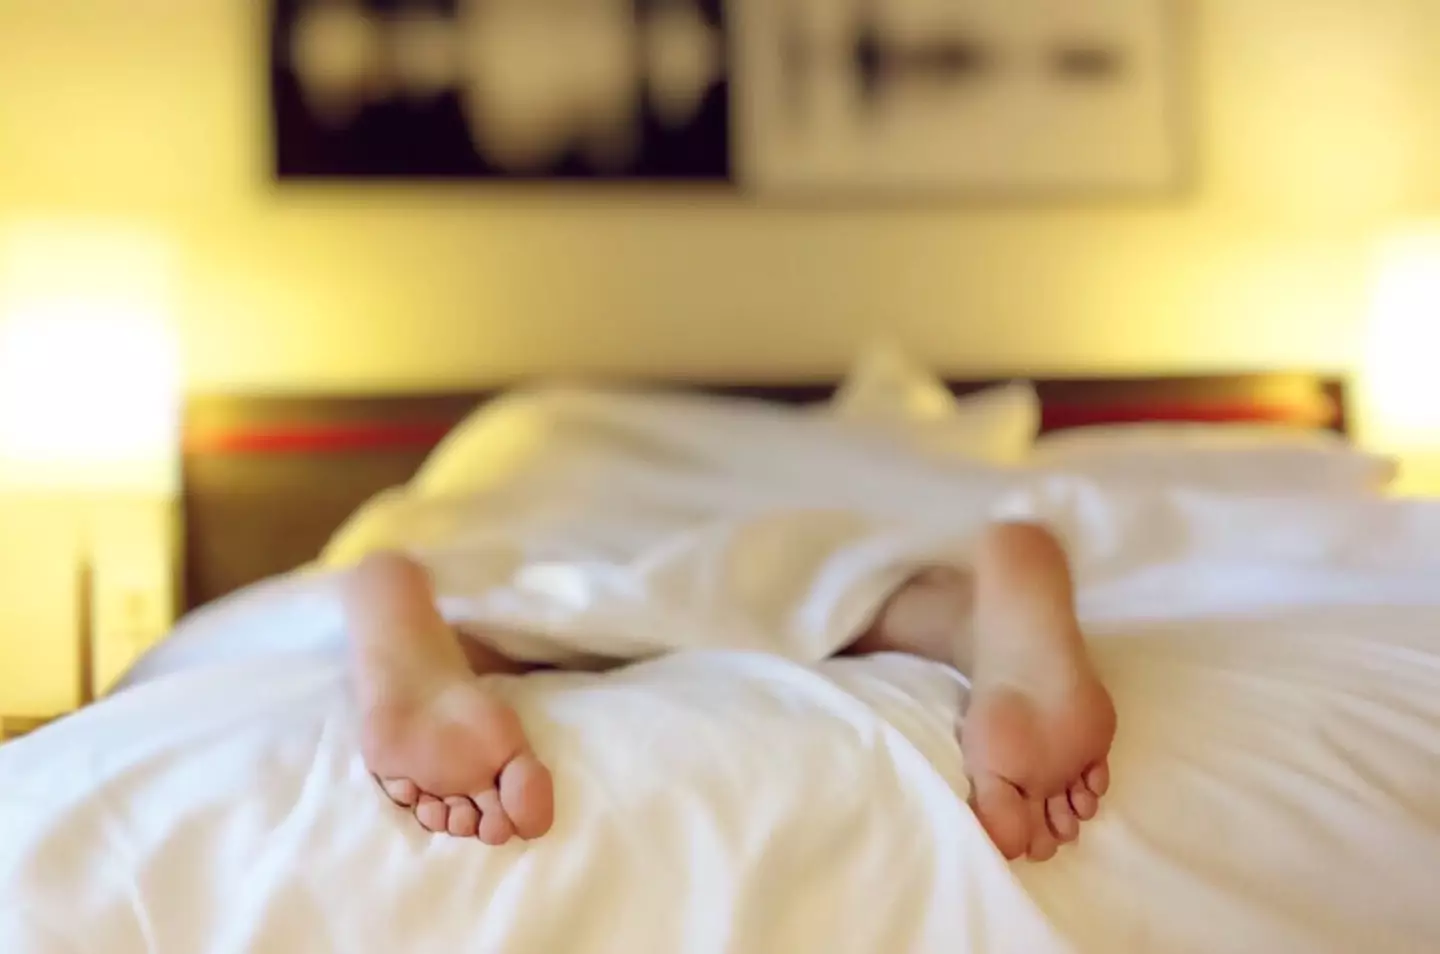 If you’re thinking of sleeping naked, this might make you think again.